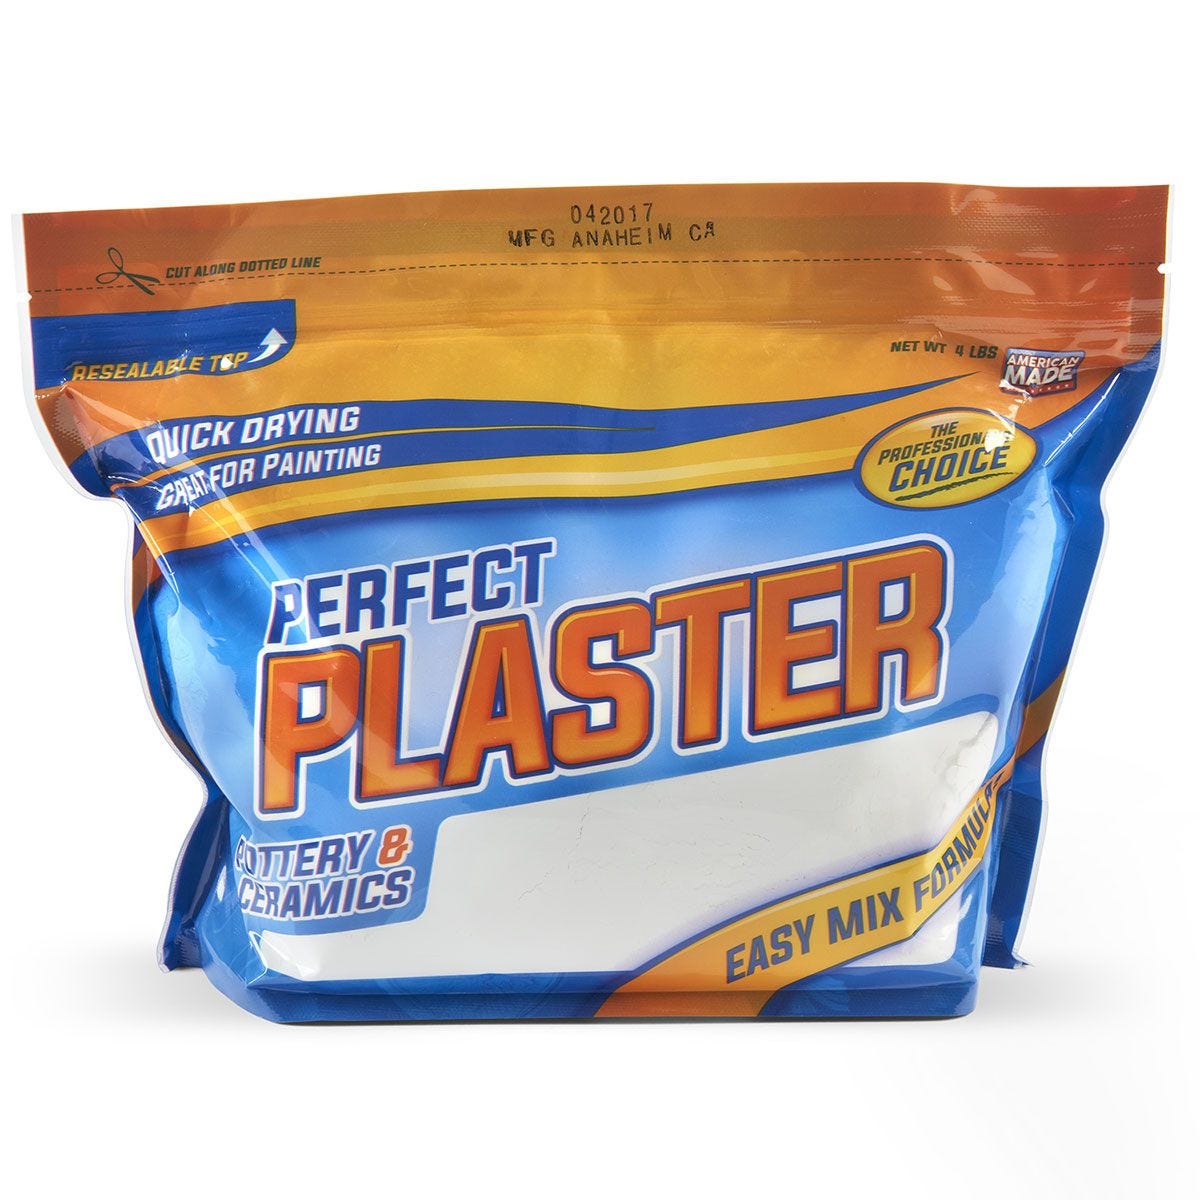  Perfect Plaster Pottery & Ceramic Casting Material - 4 Pound